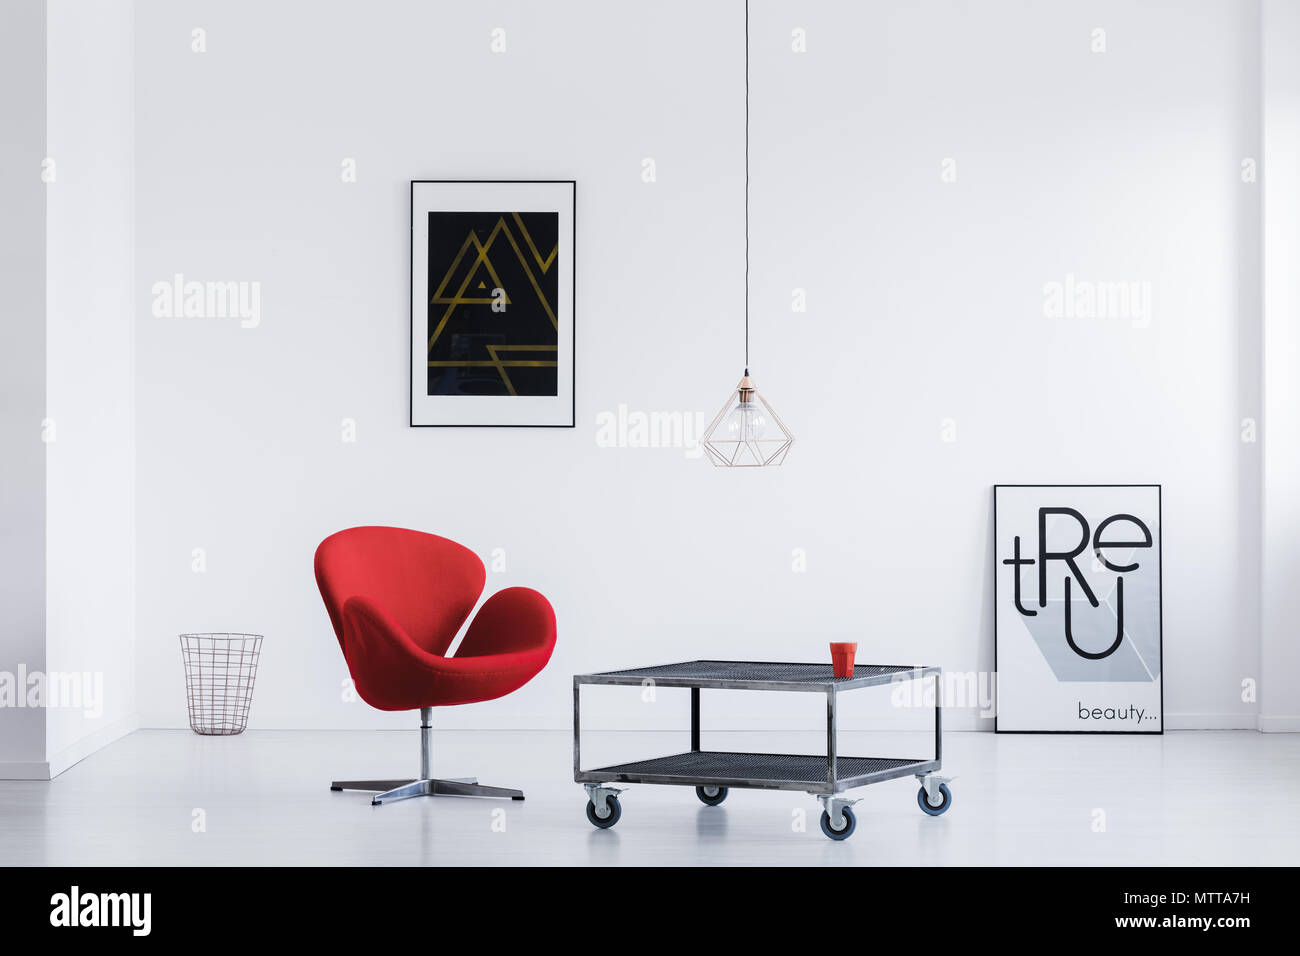 Stylish waiting room with white walls, industrial table, red armchair and modern posters Stock Photo